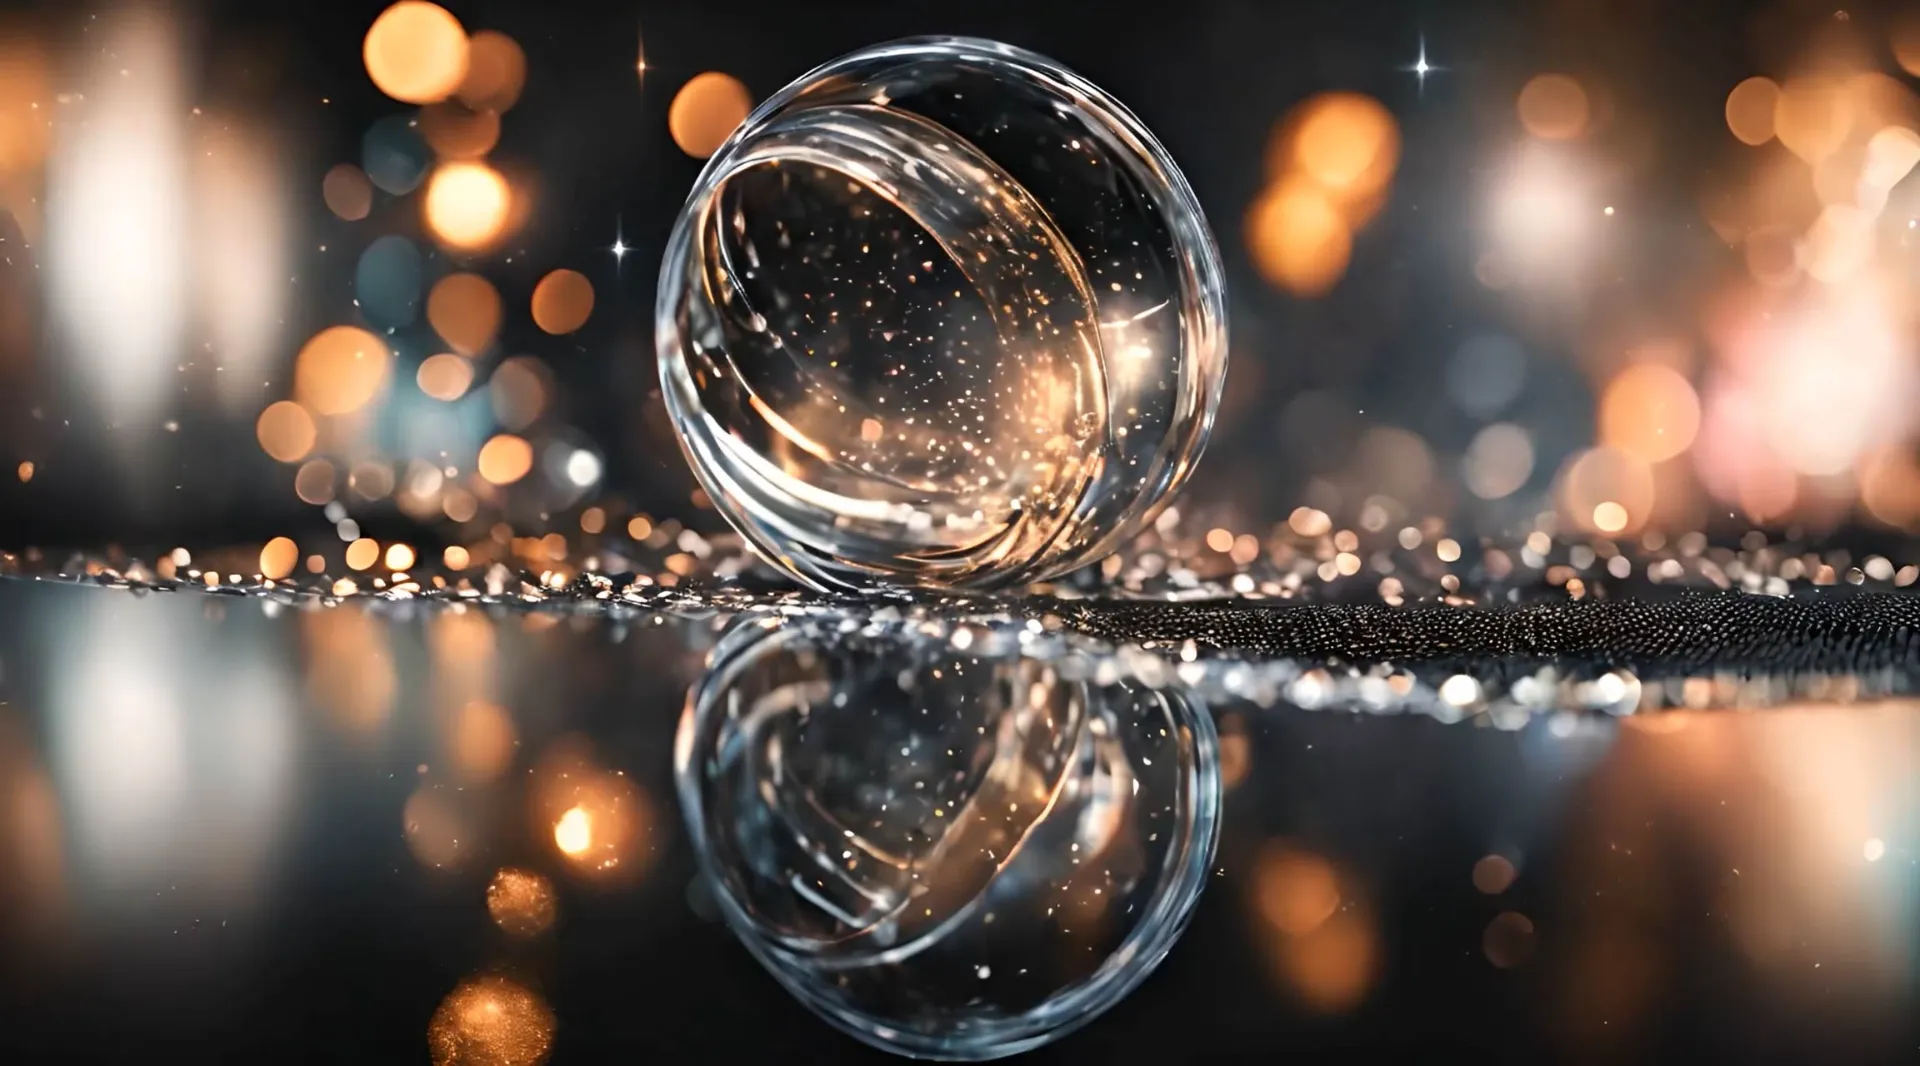 Futuristic Crystal Ball in Glowing Ambience Backdrop Video